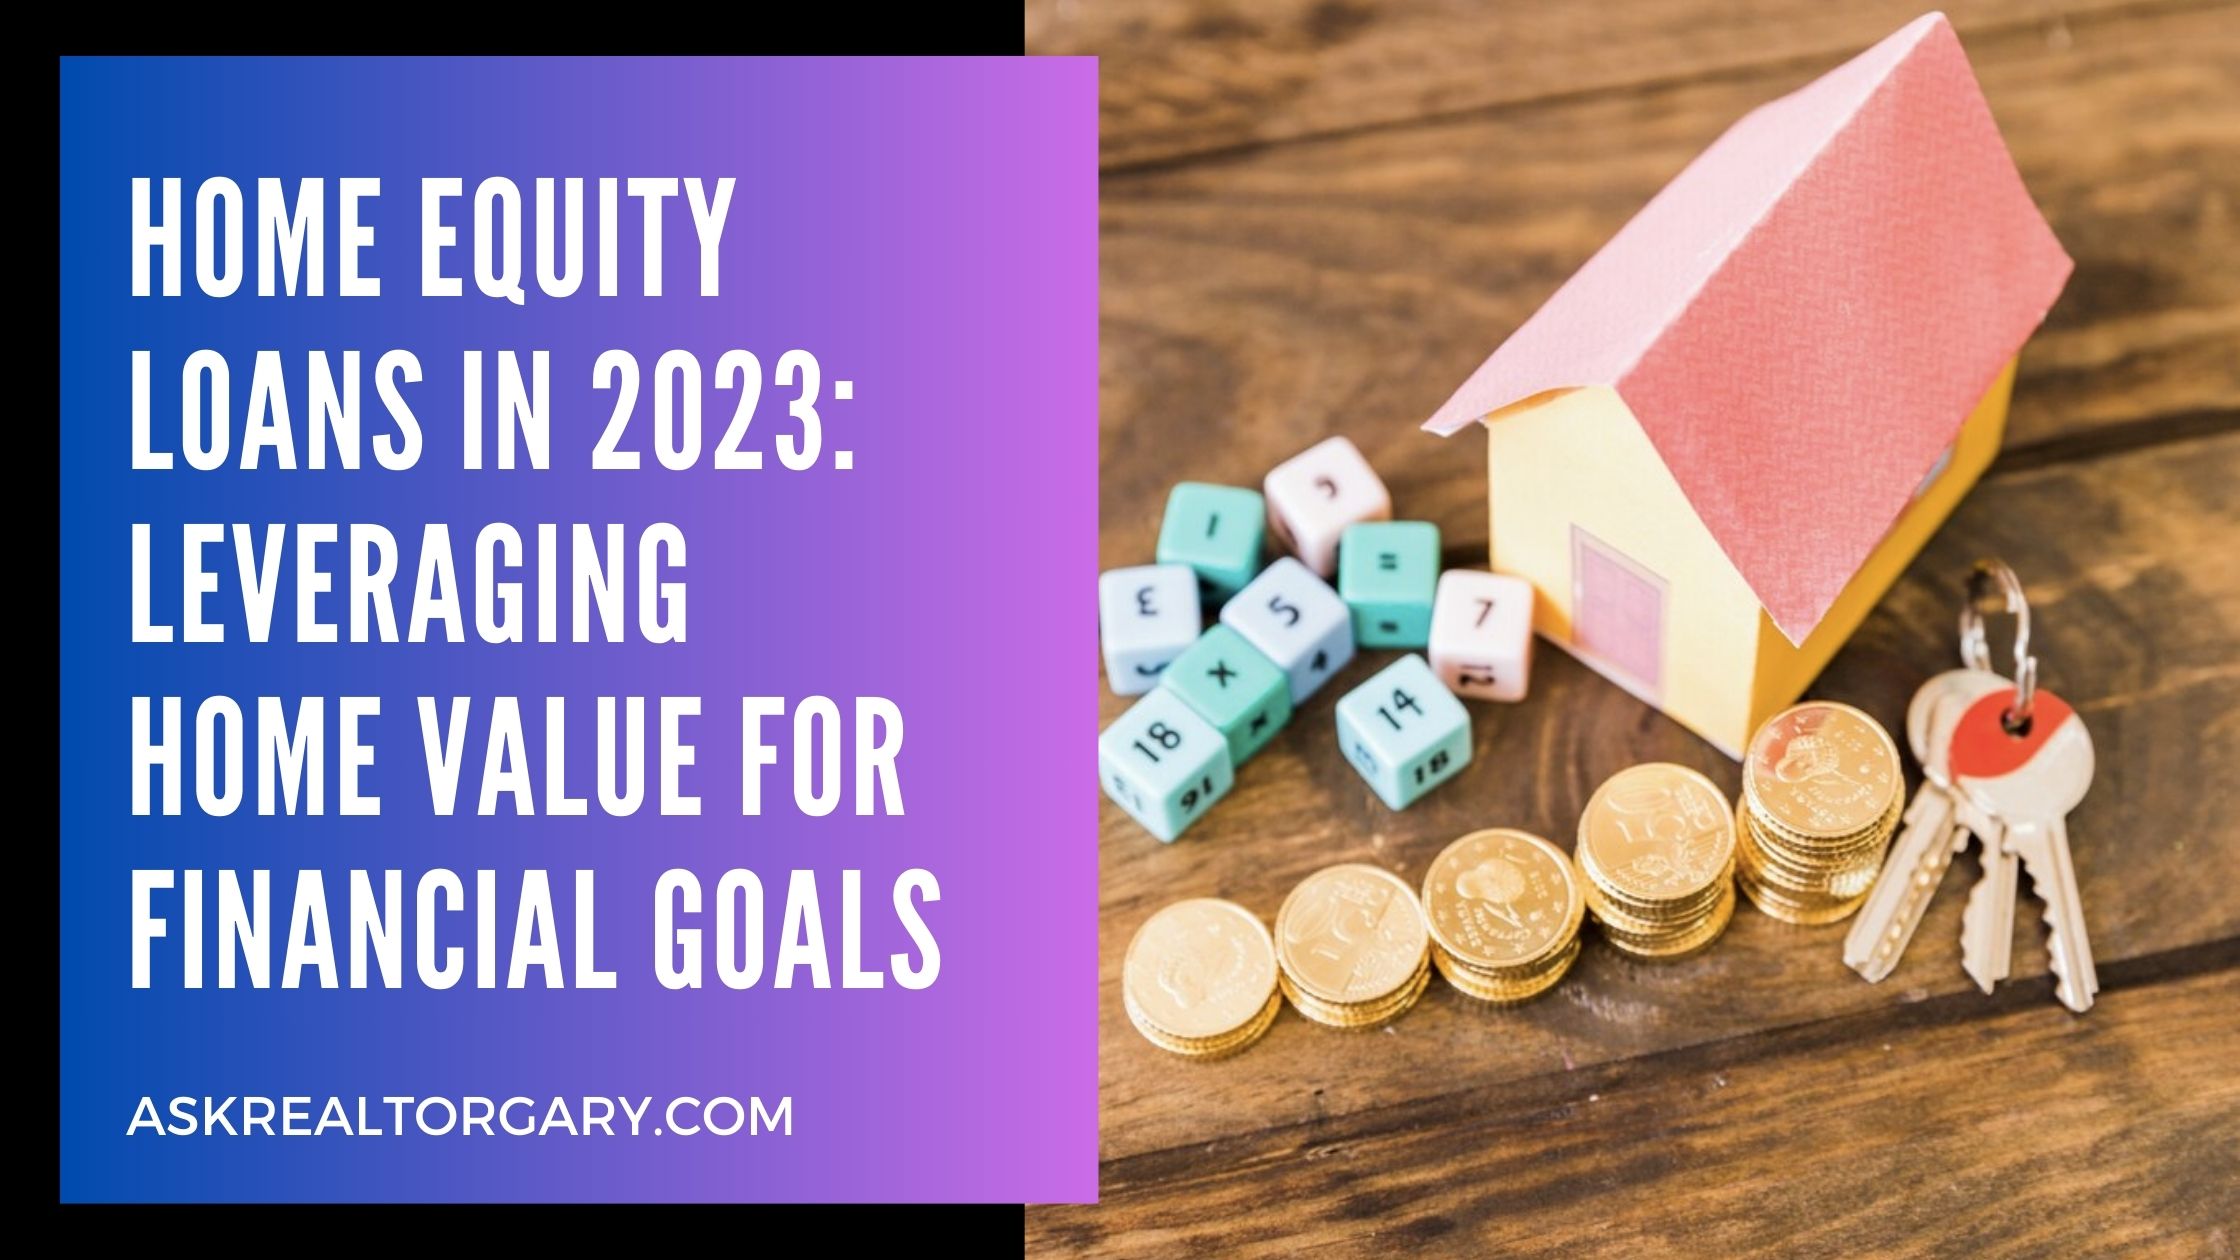 Home Equity Loans in 2023: Leveraging Home Value for Financial Goals